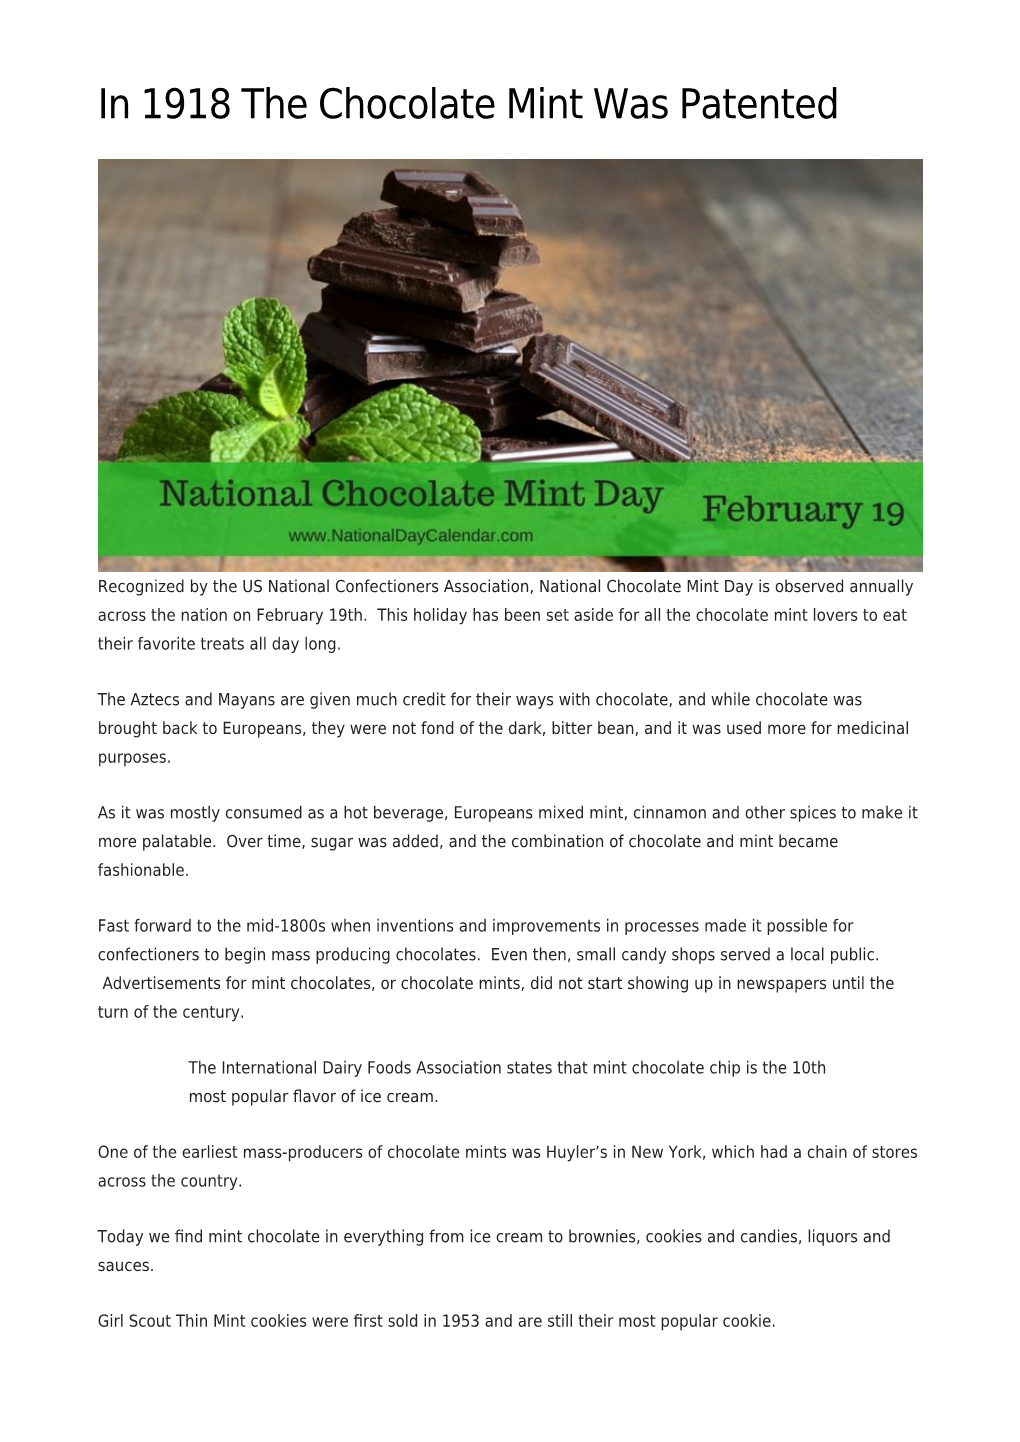 In 1918 the Chocolate Mint Was Patented